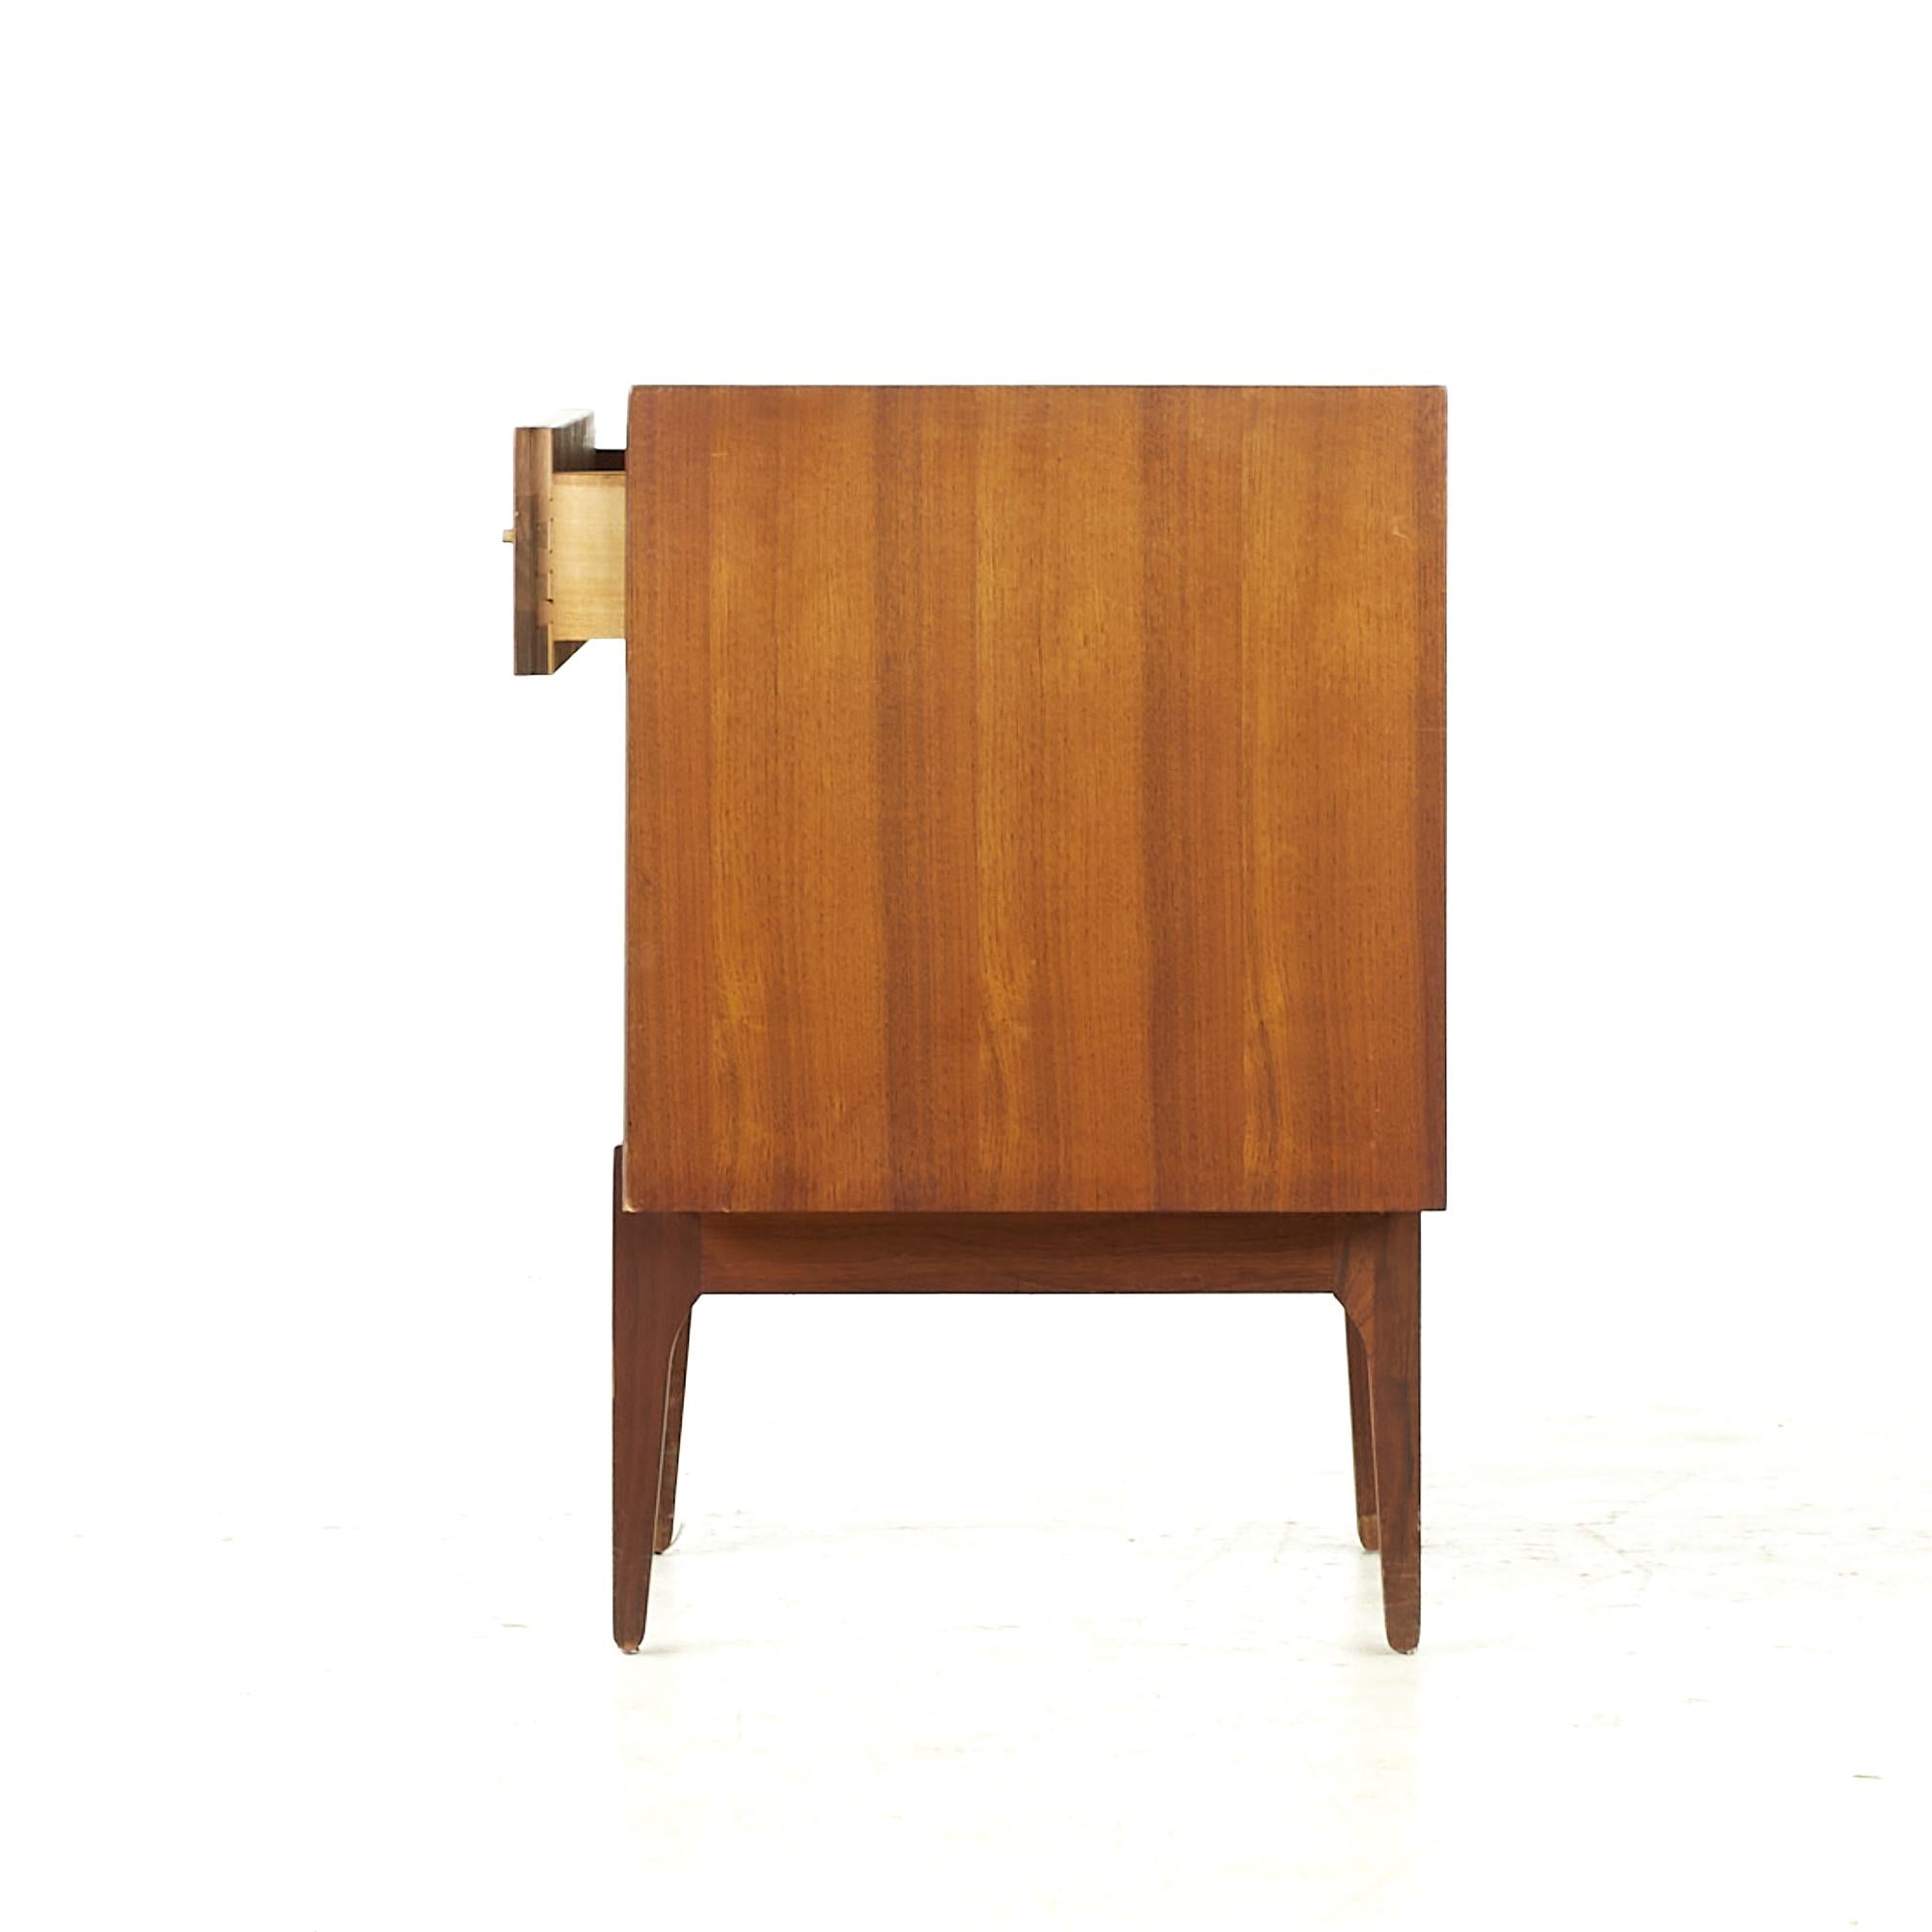 Ramseur Midcentury Walnut and Brass Nightstand In Good Condition For Sale In Countryside, IL